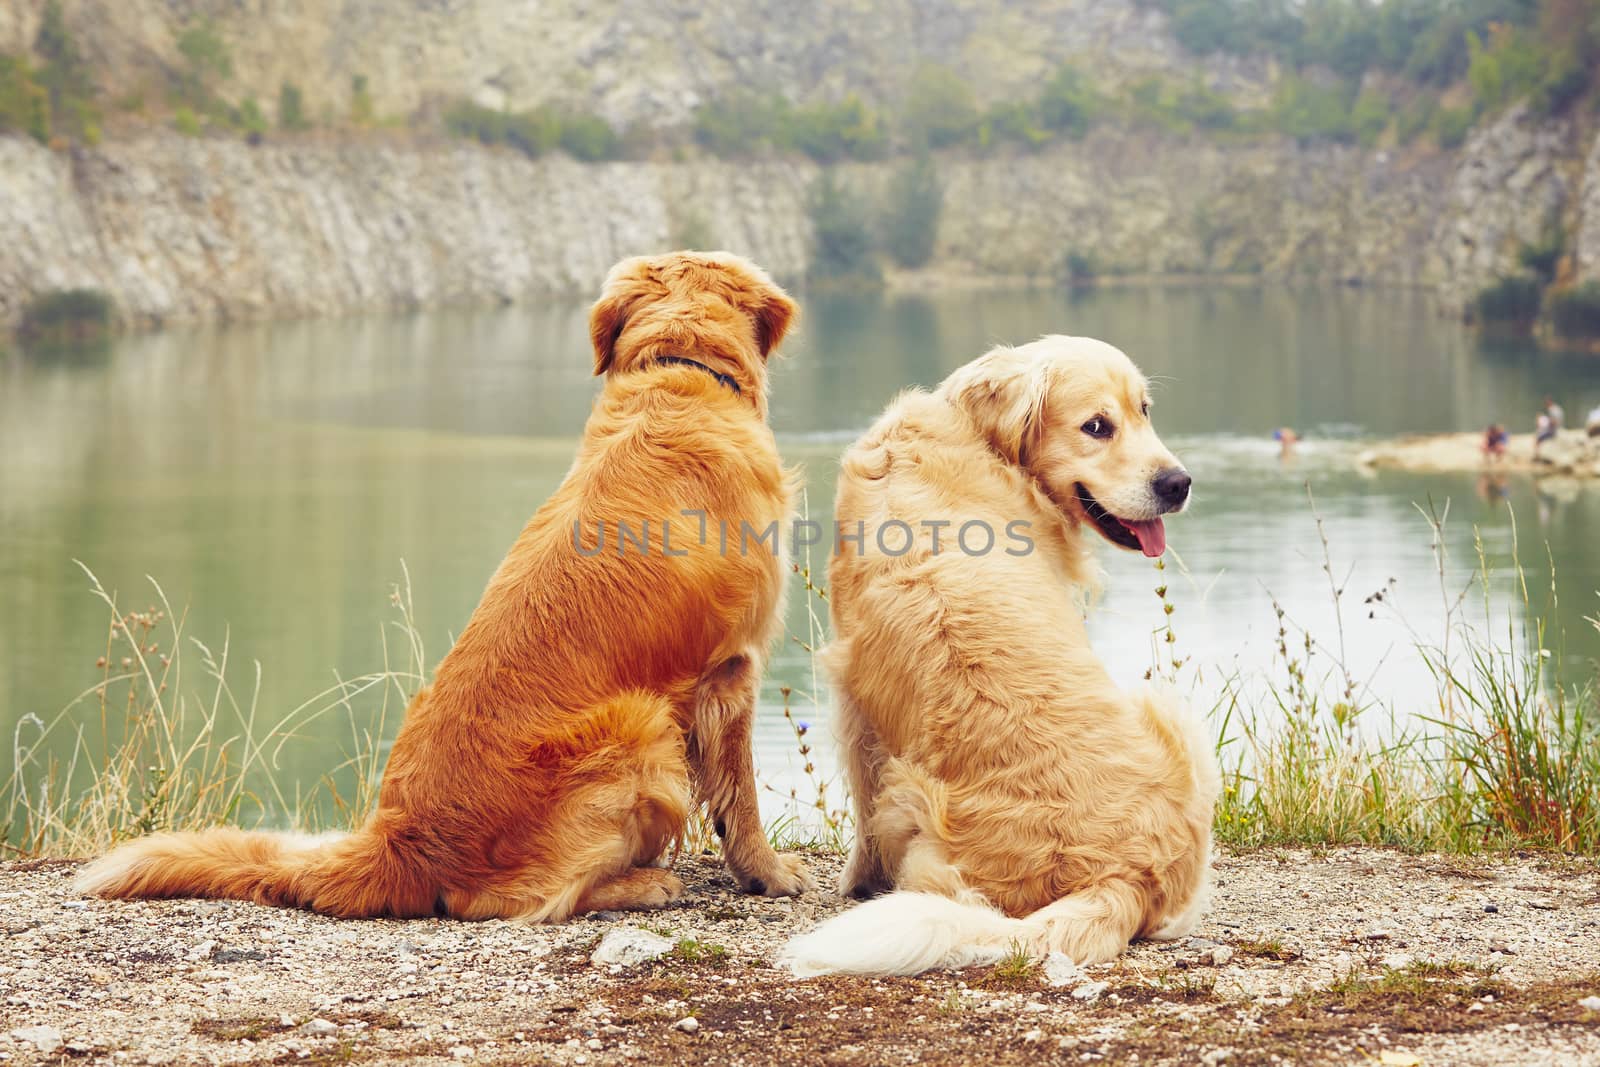 Lake for swimming. Two golden retriever dogs in old stone quarry. 